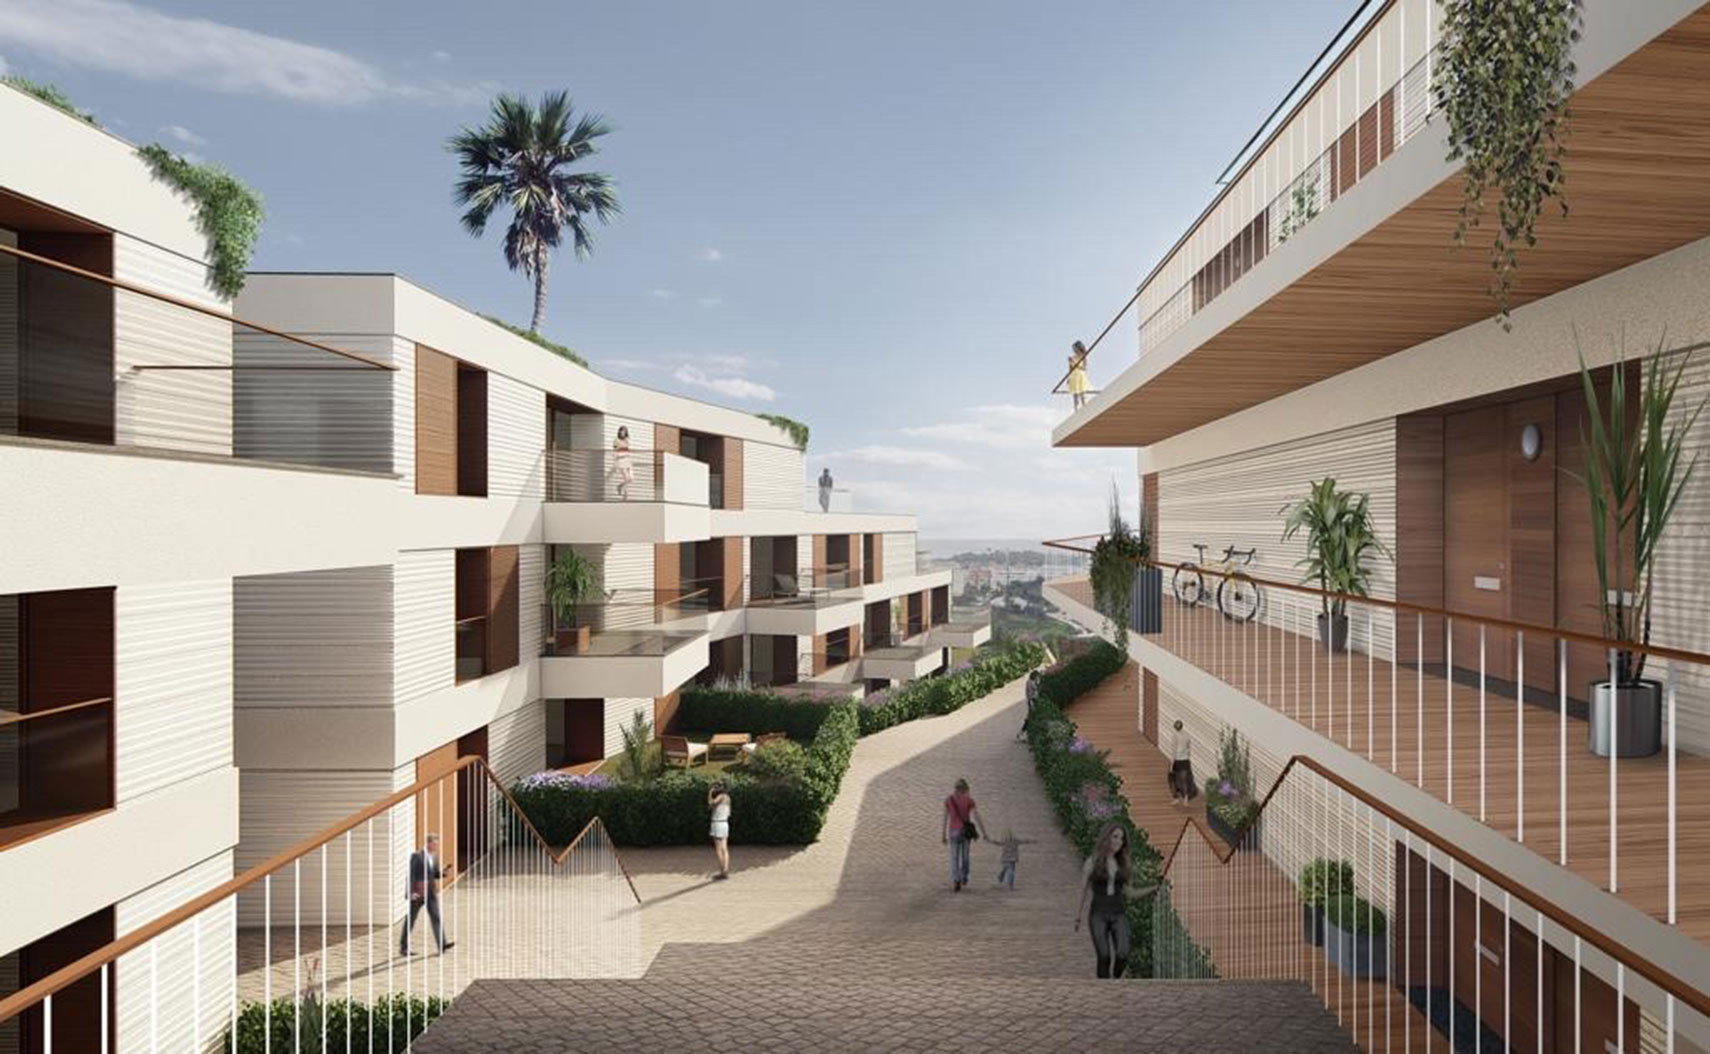 Cassia: Flats and penthouses overlooking the sea situated in Estepona. | Image 6